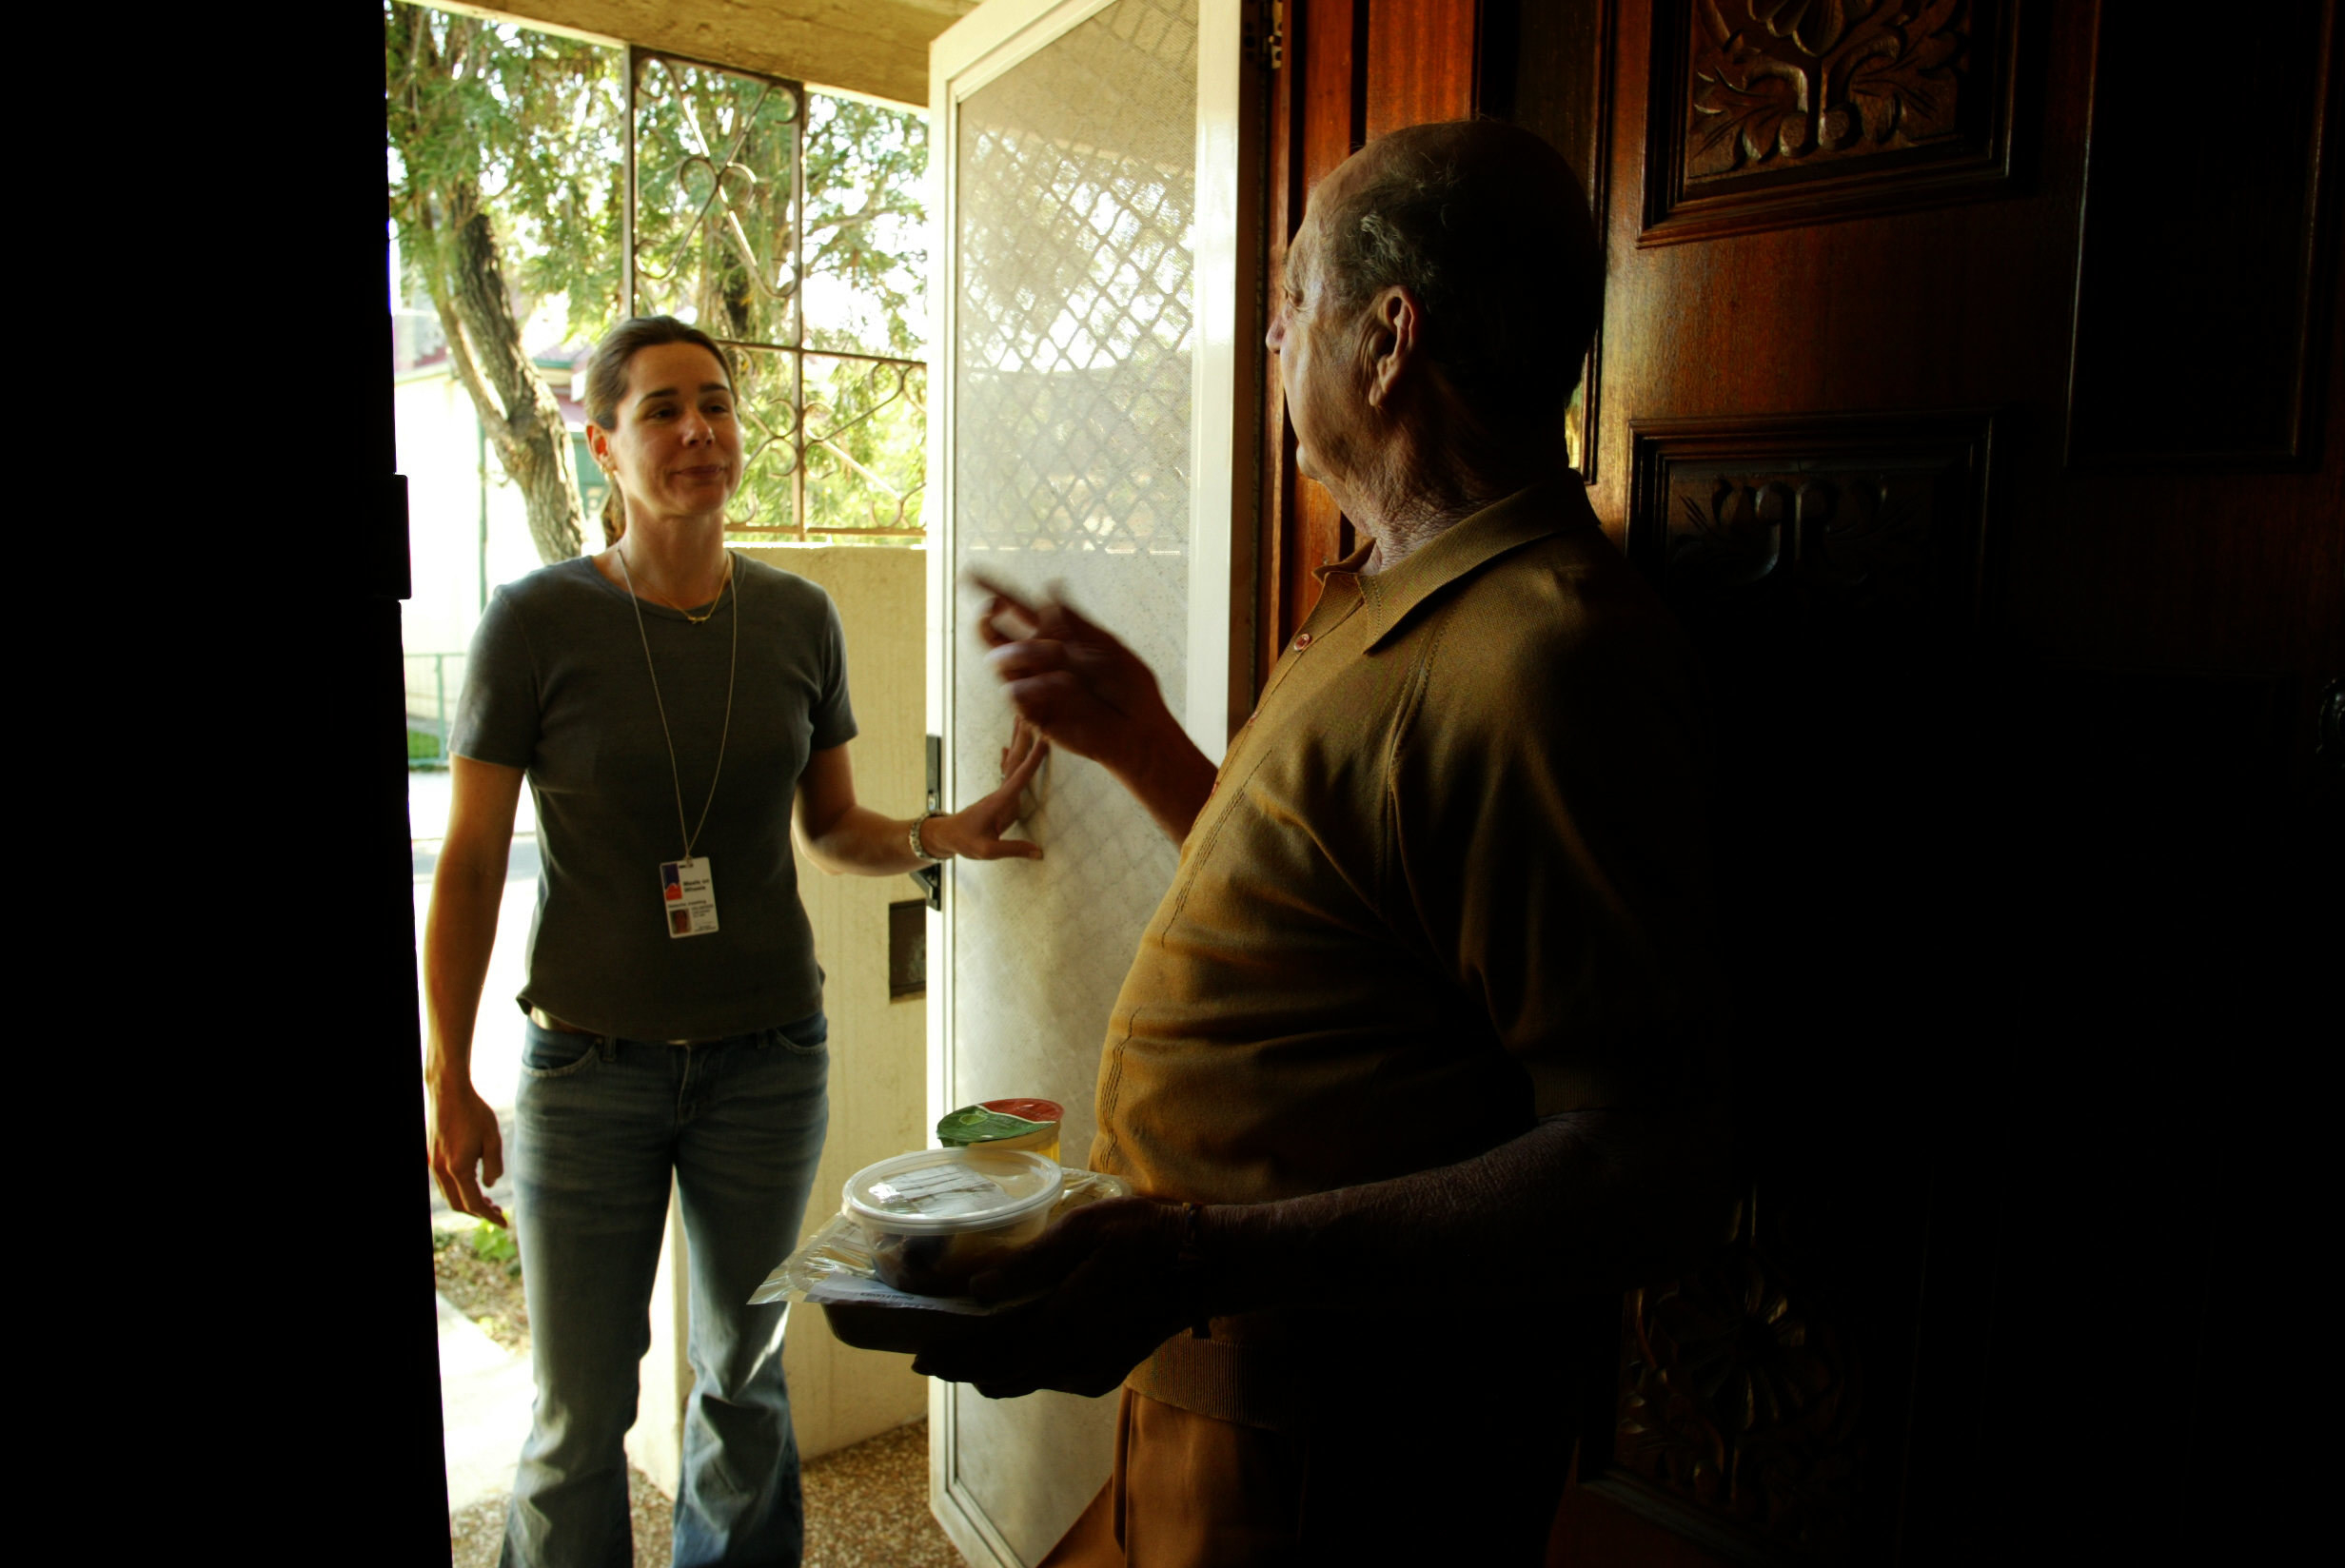 (AUSTRALIA OUT) Meals on Wheels volunteer Natacha Joesting delivers a meal to St Peters resident Harold Farmer on 25 August 2004.